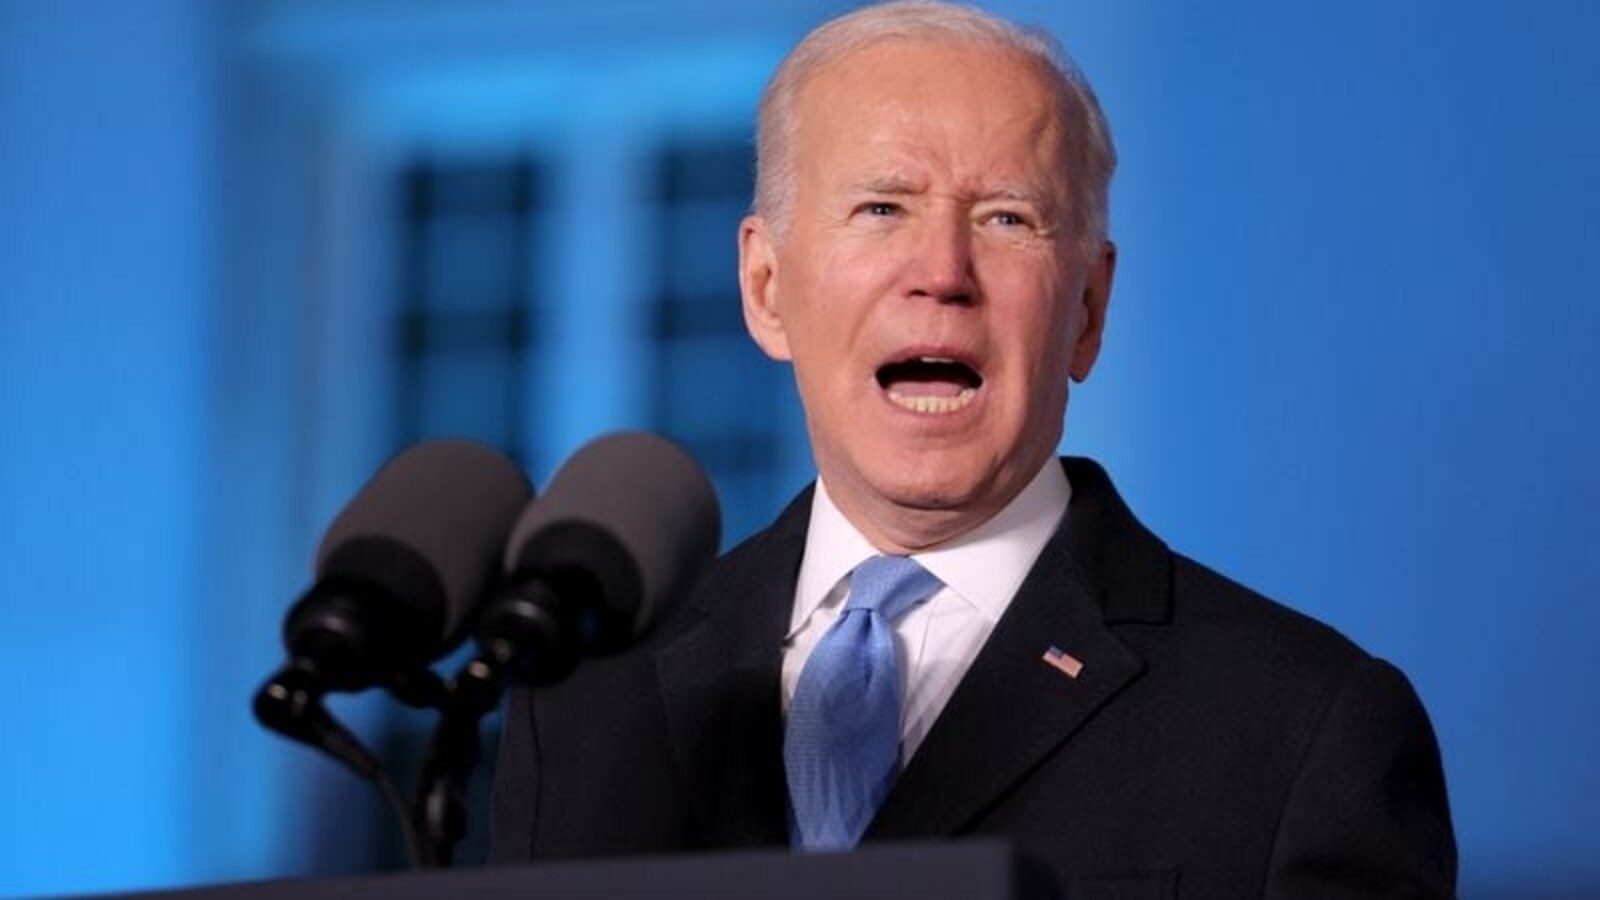 ‘India has its own problems…’: What Biden said on Quad and China’s Xi